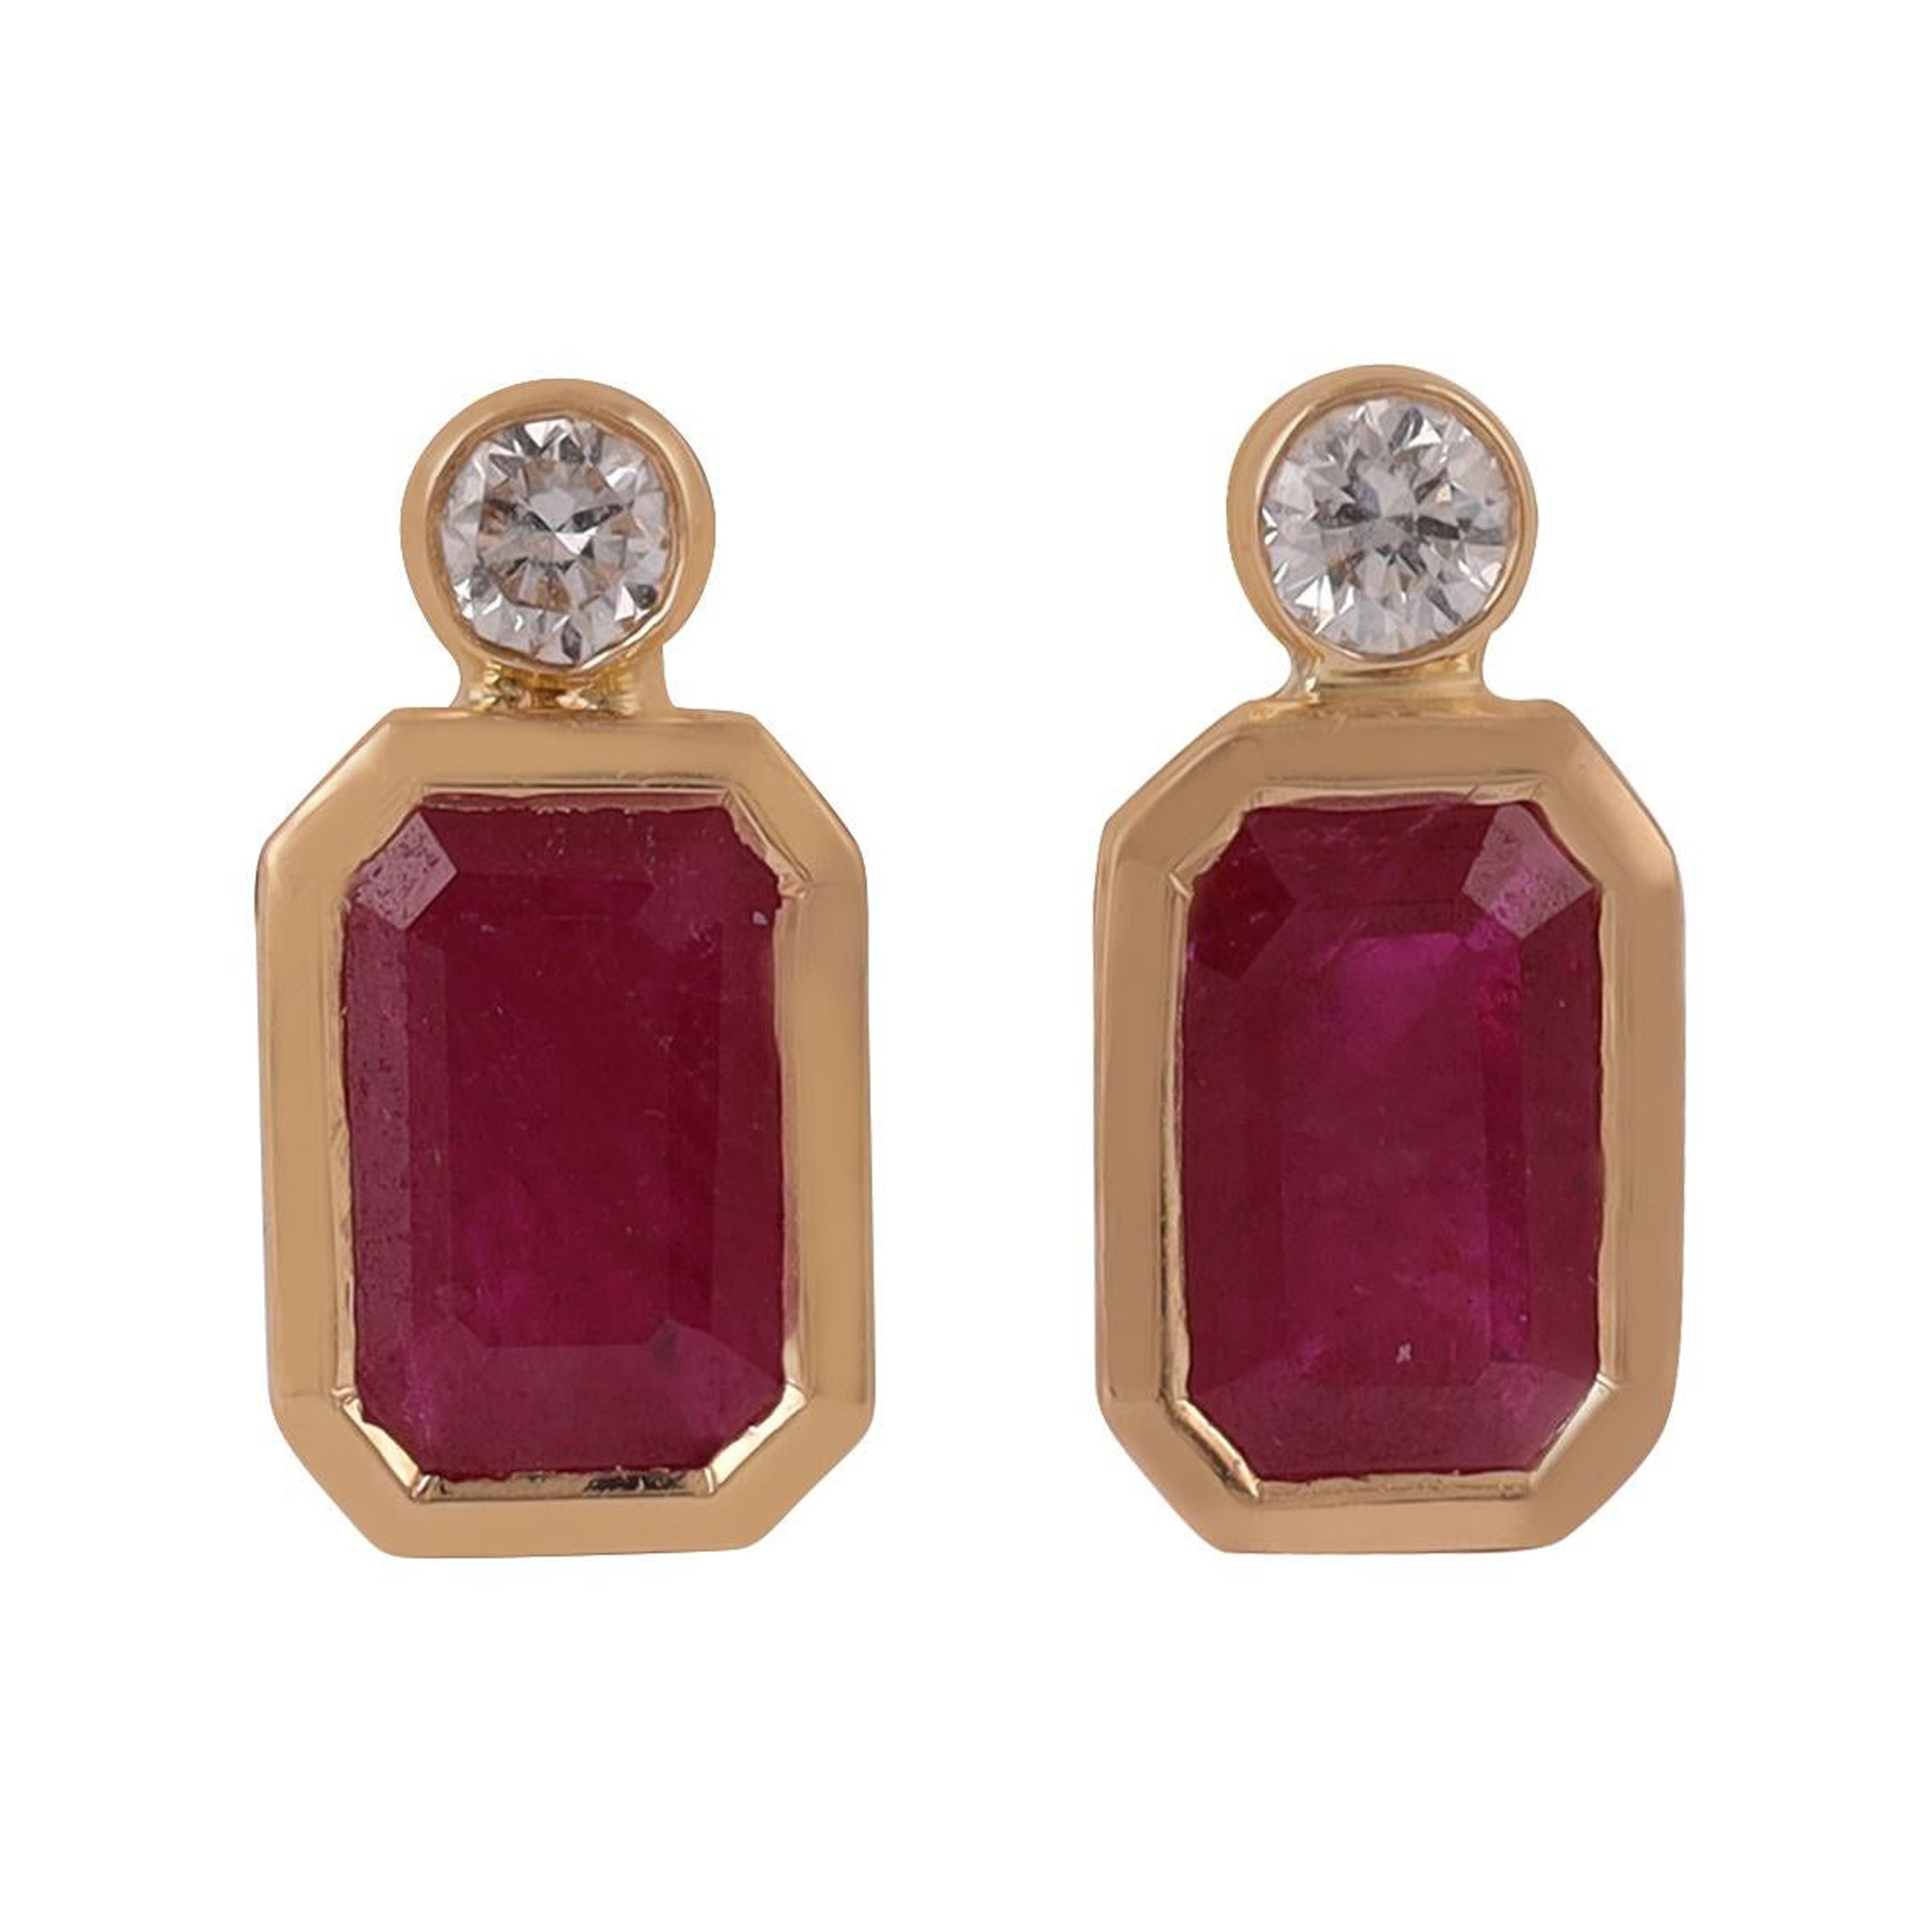 0.98 Carat Mozambique Rubies Stud Earrings Diamonds and 18k Gold